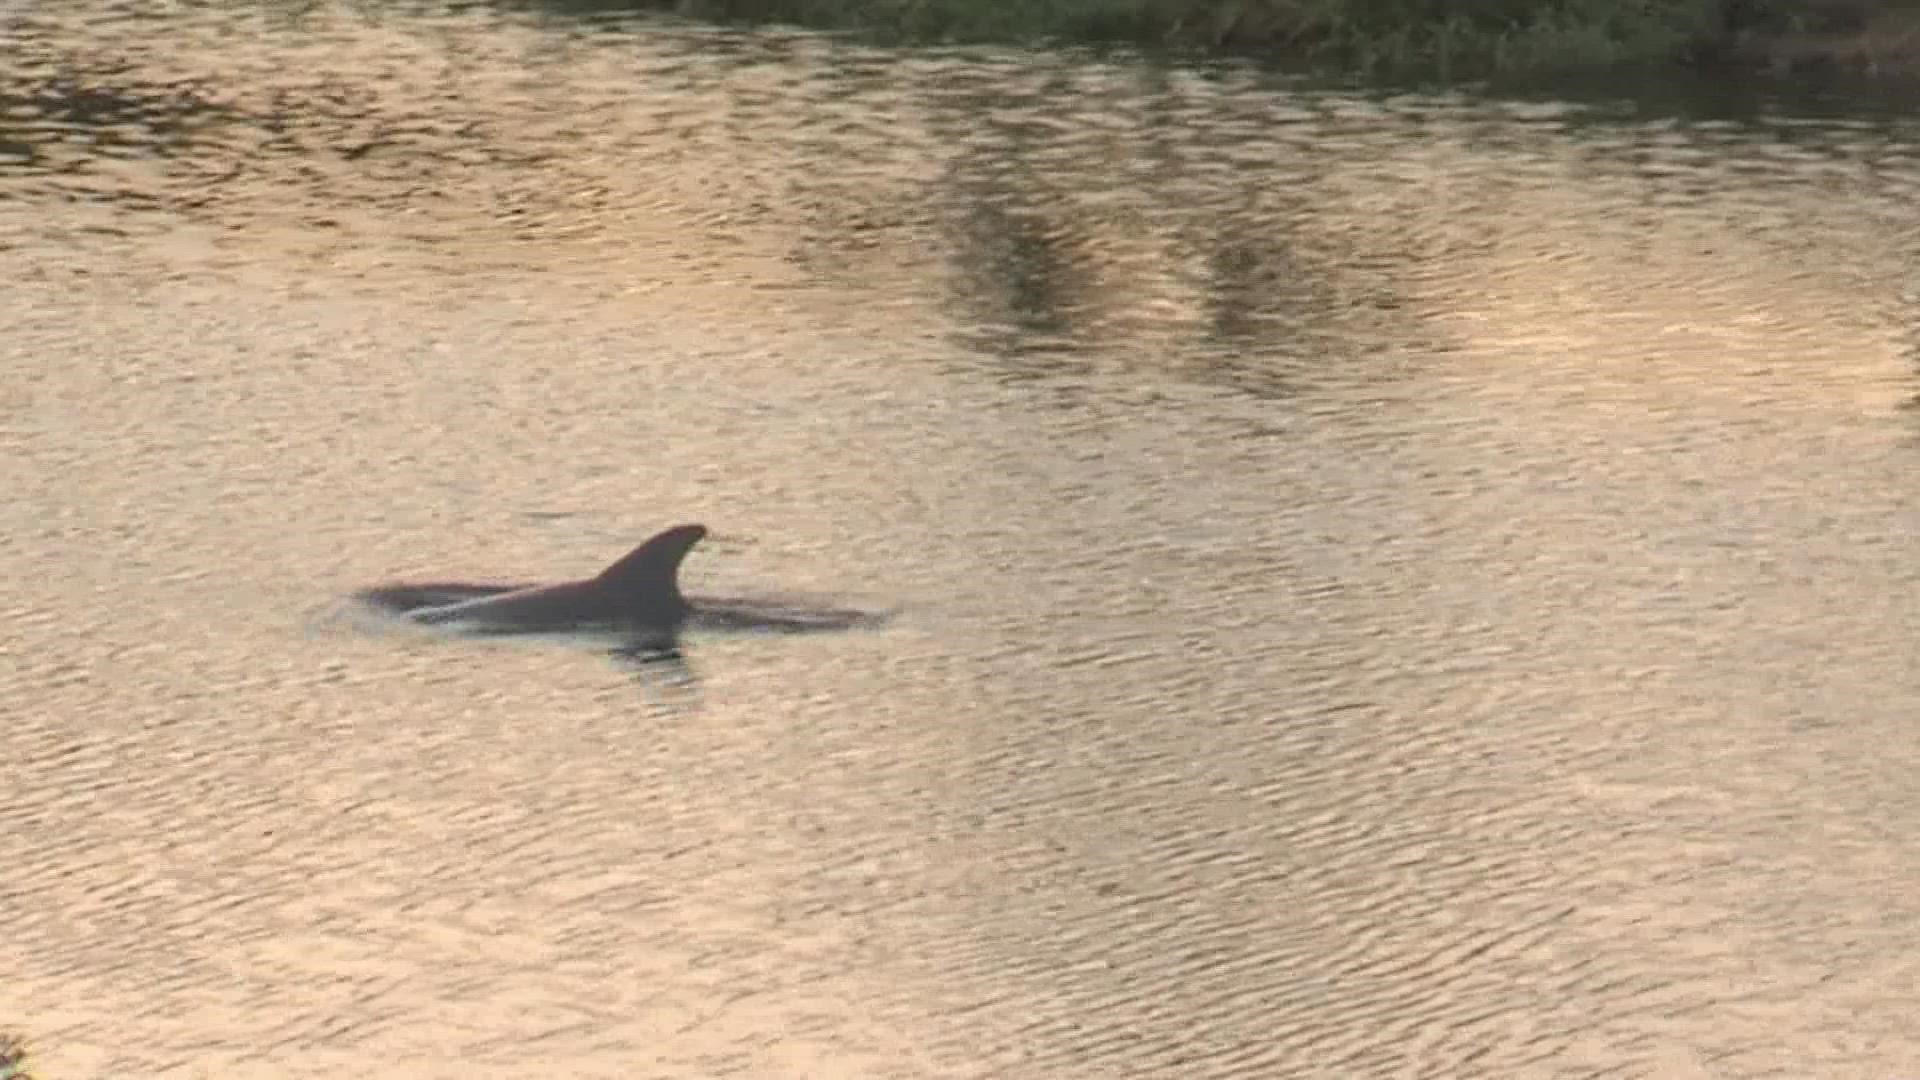 Residents are surprised to have a dolphin in Louisiana waters but others are worried for its safety.